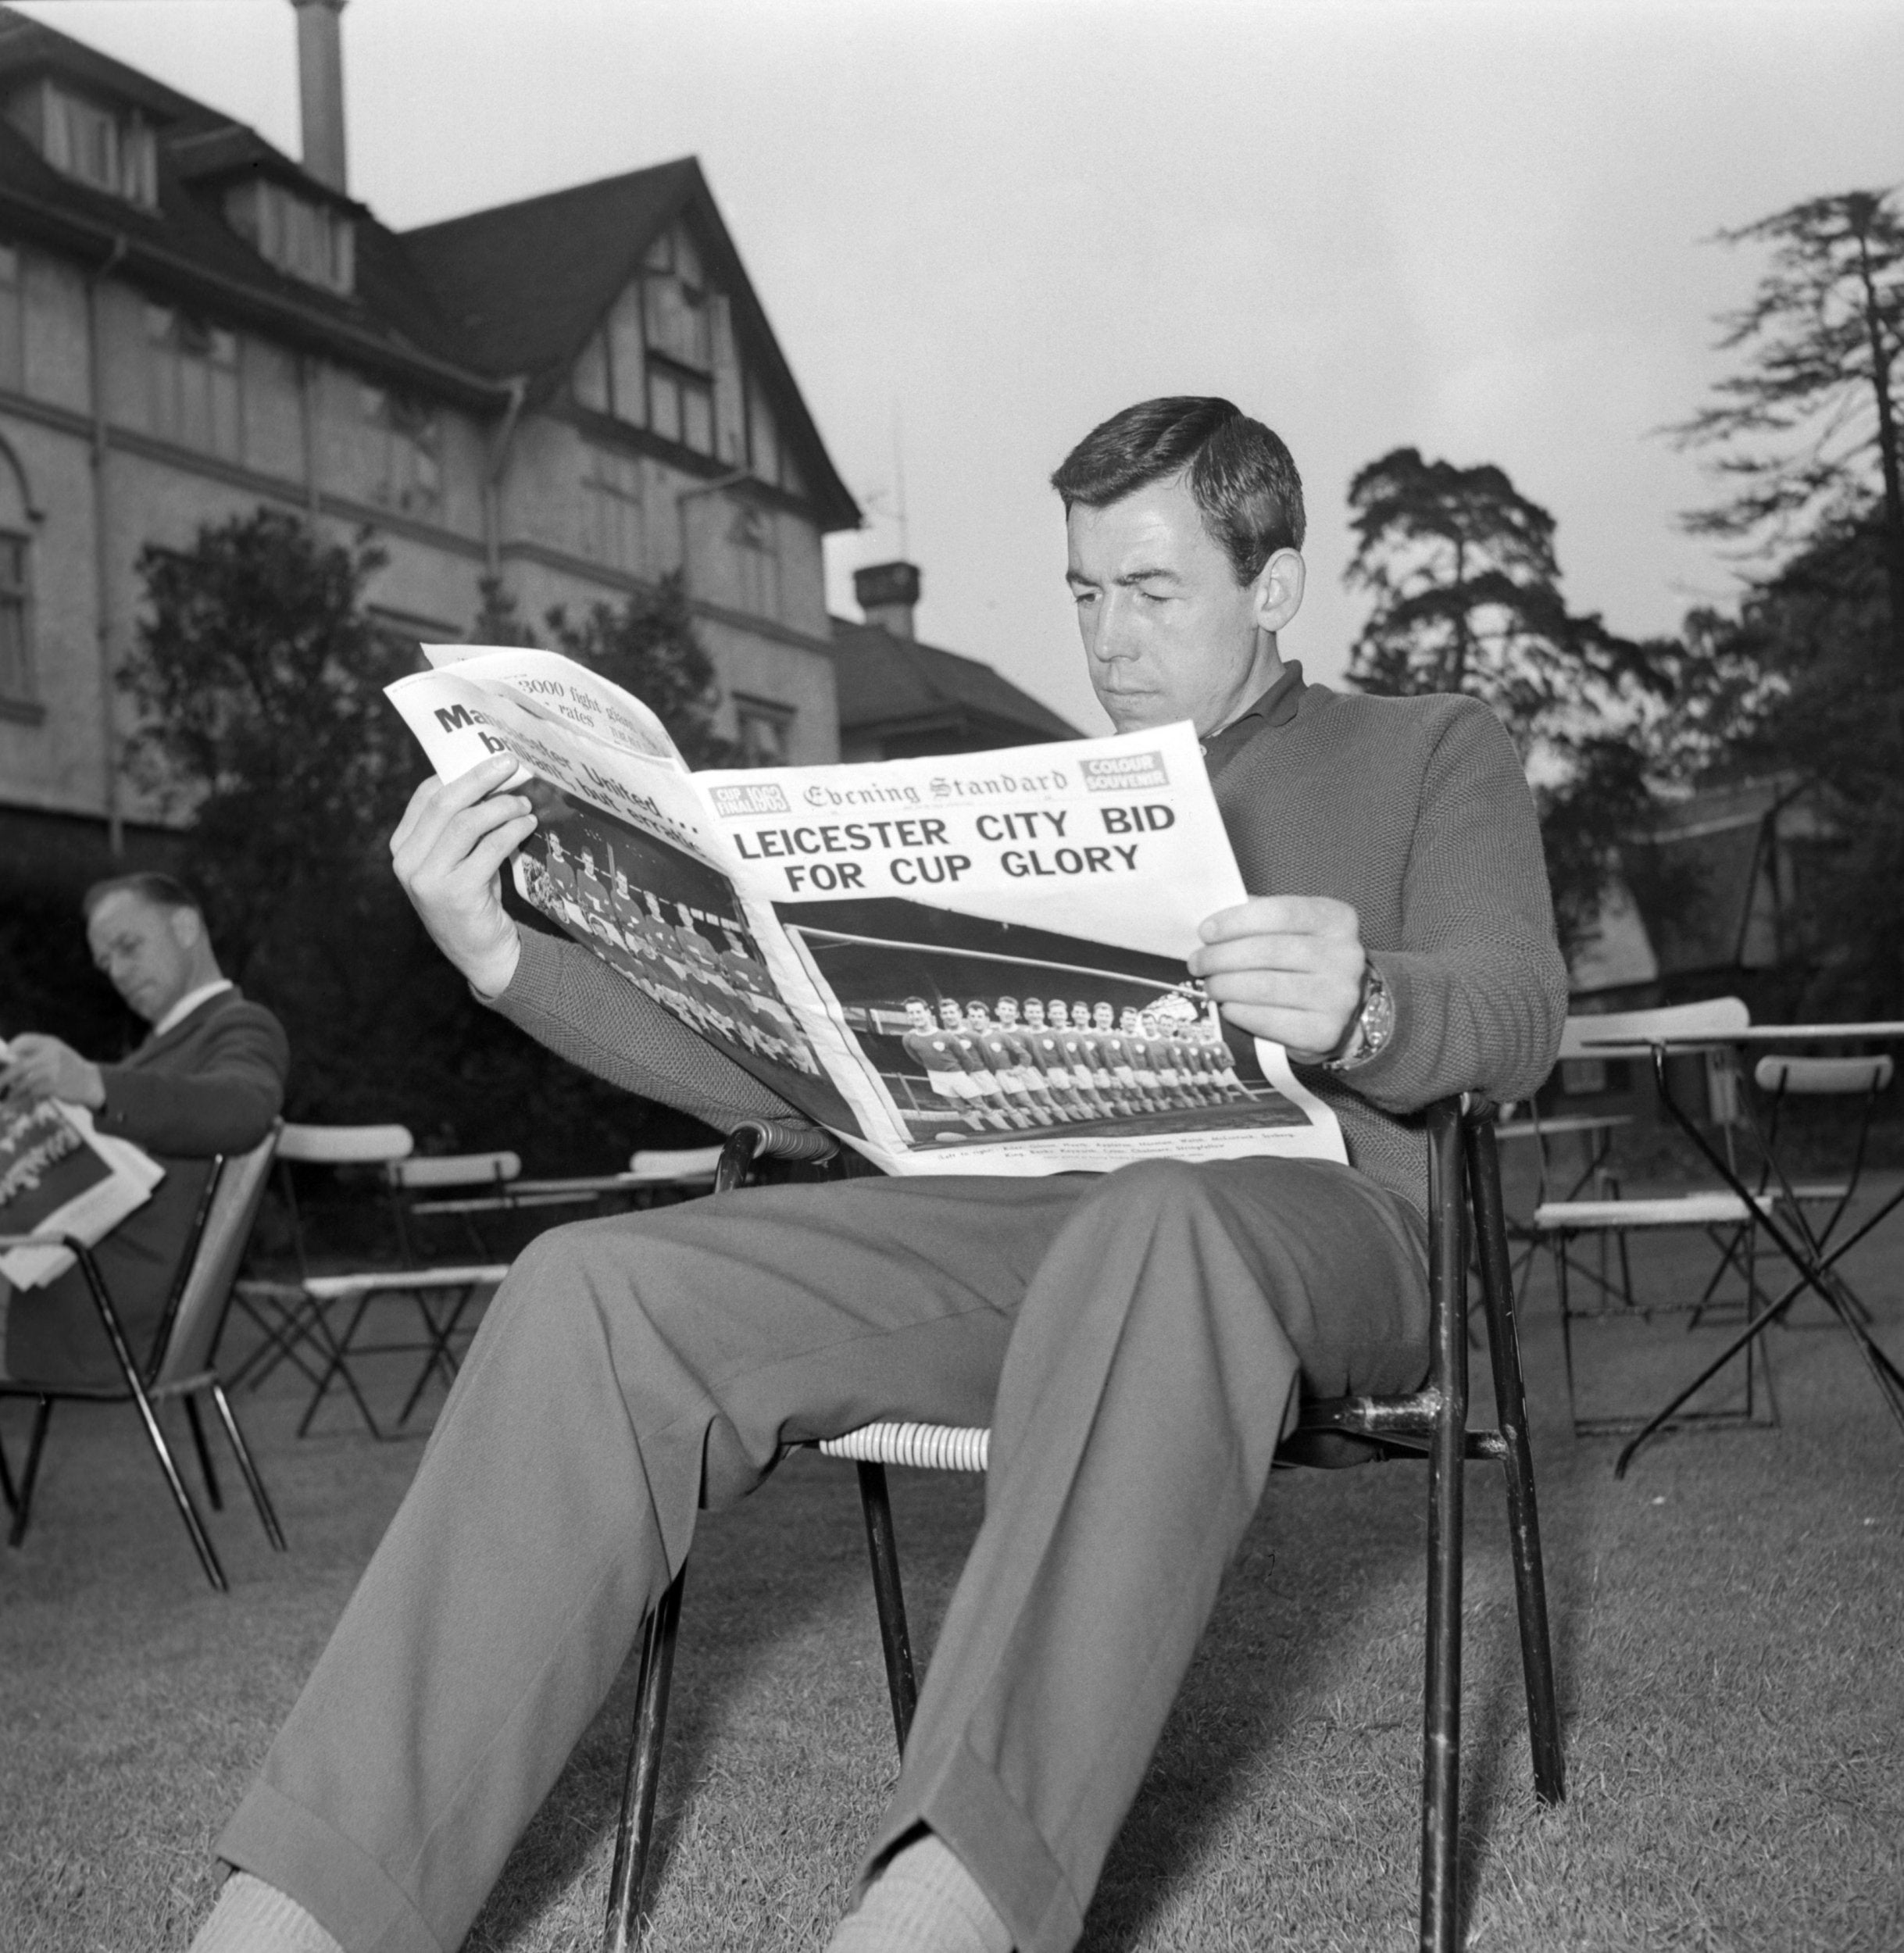 Leicester City goalkeeper surveys his team’s cup chances in 1963